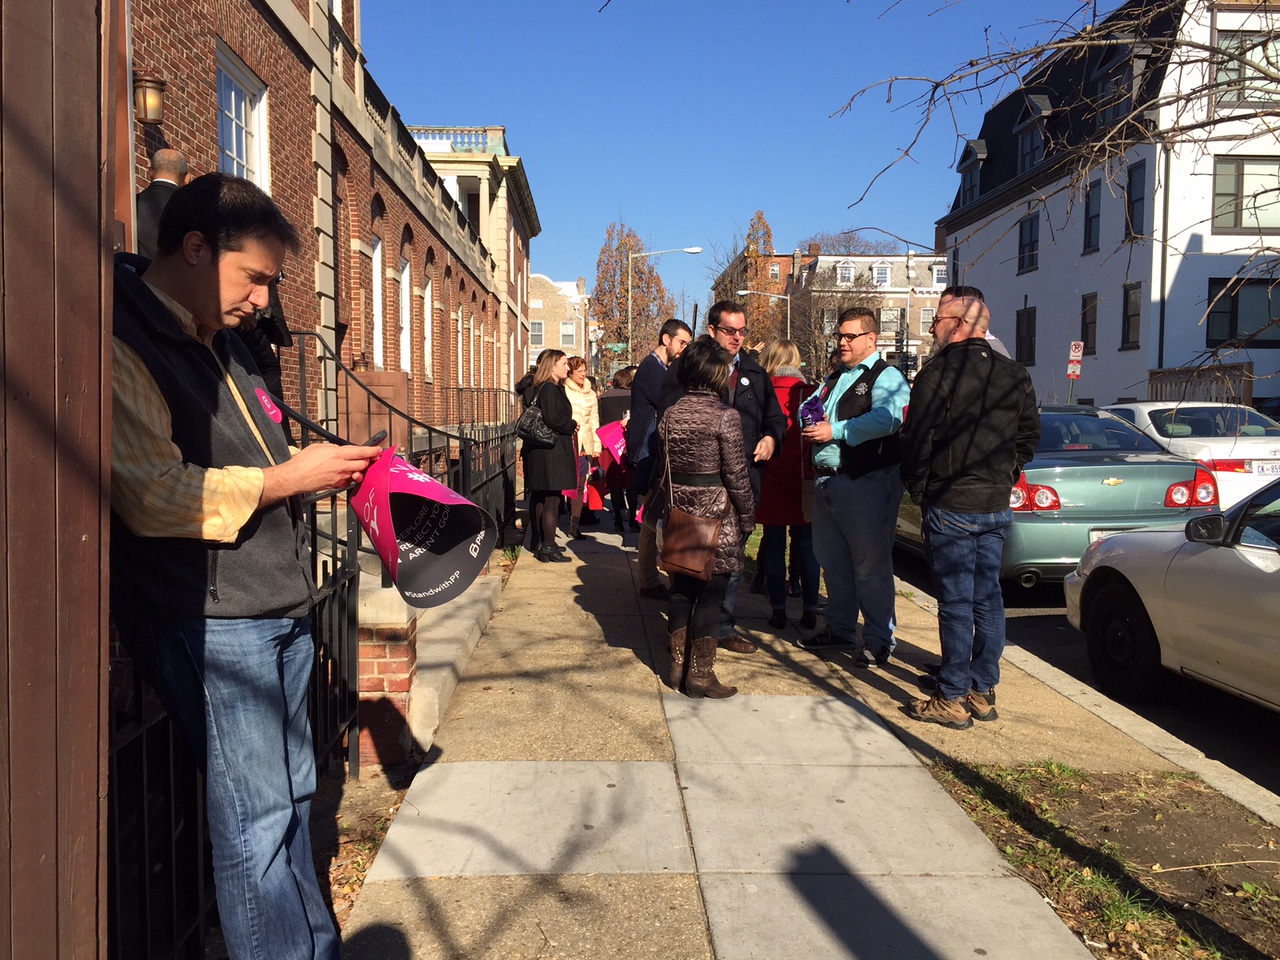 Planned Parenthood supporters gather in D.C. to show solidarity